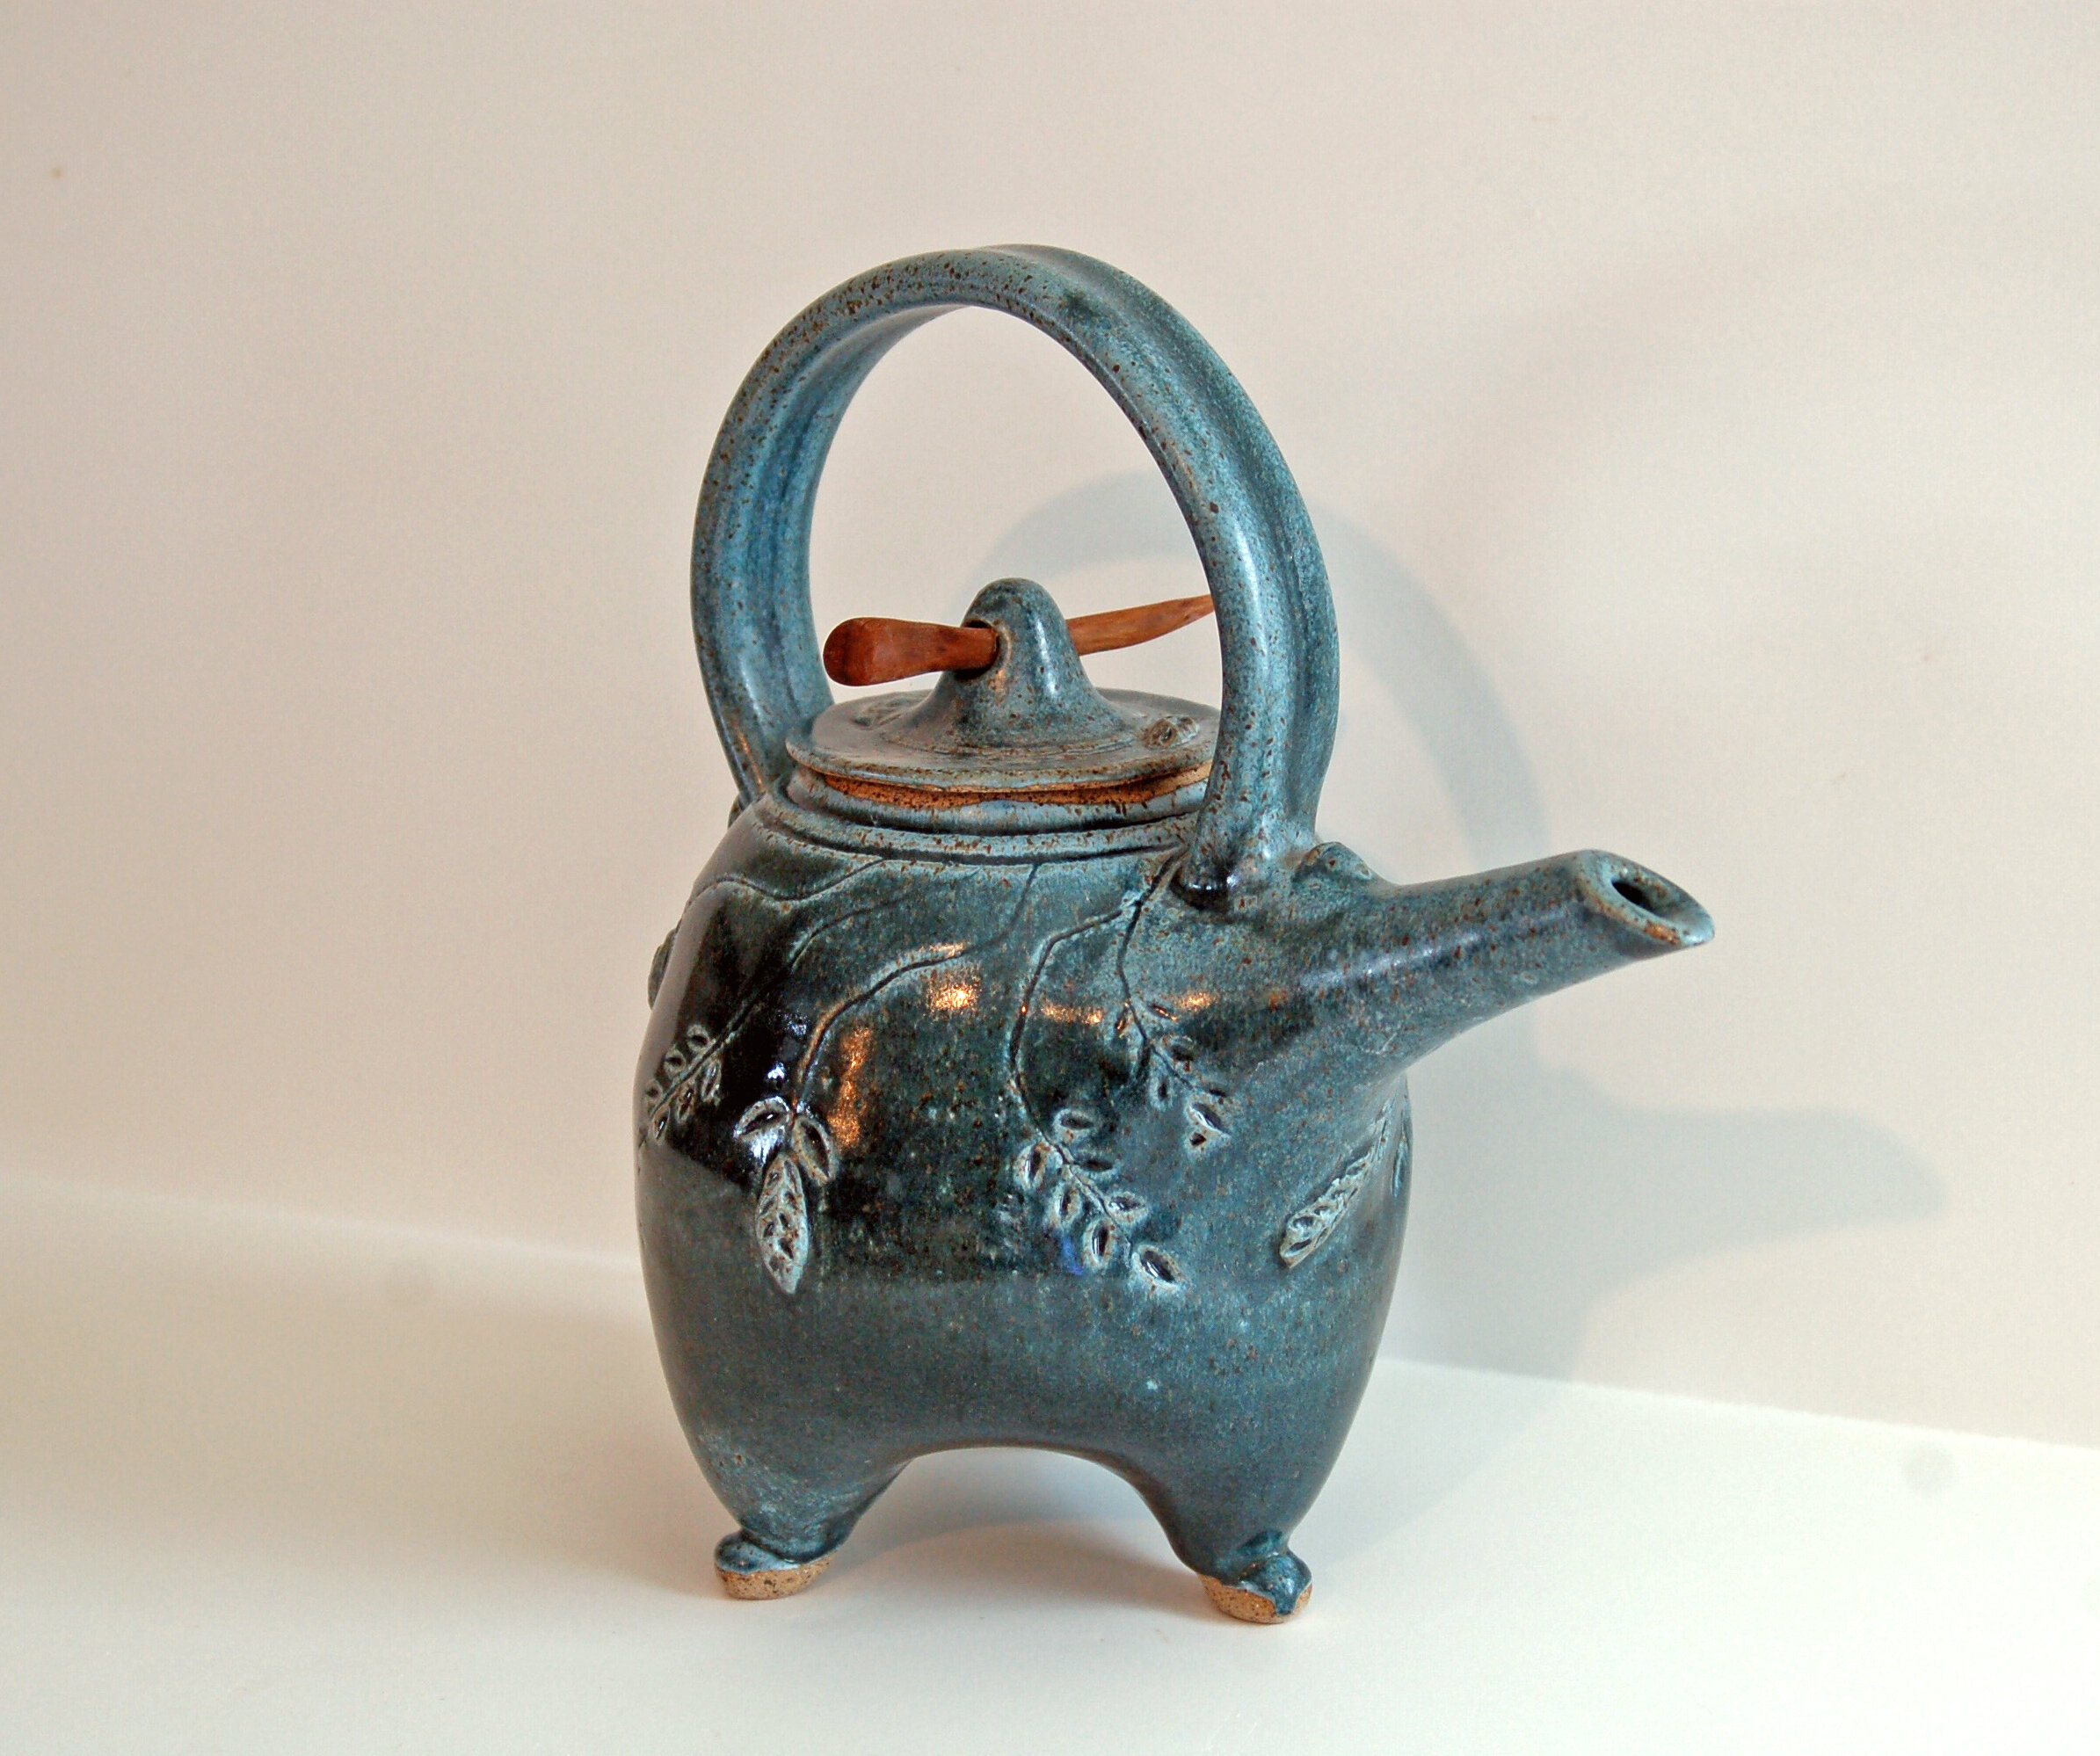 Custom Made Teapot Handcrafted by Michael Gibbons of Nutfield Pottery, Derry, New Hampshire USA